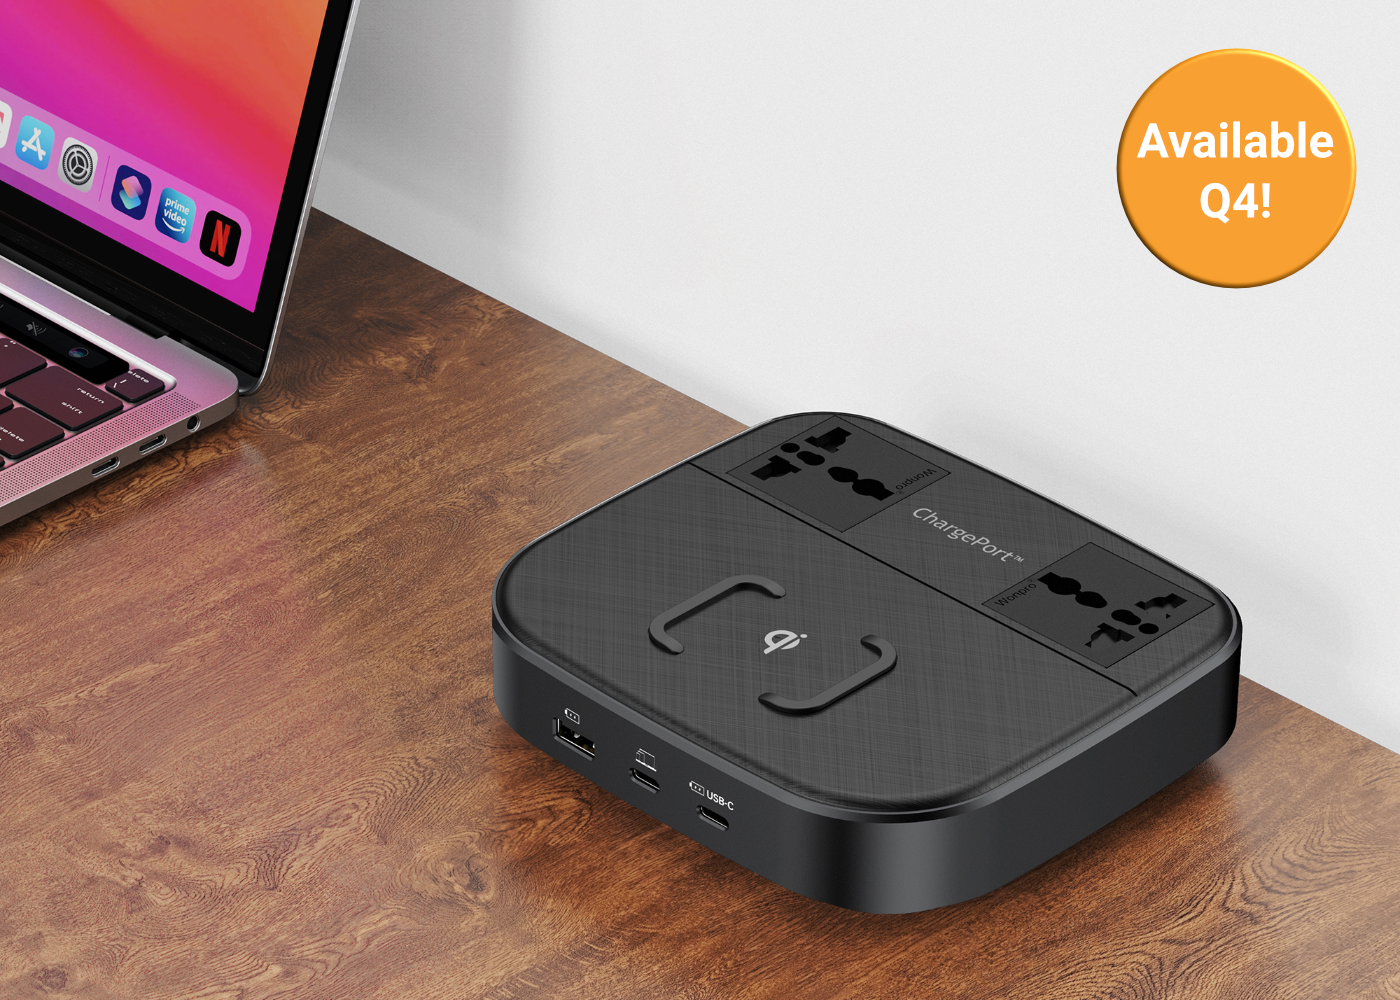 ChargePort Pro Universal